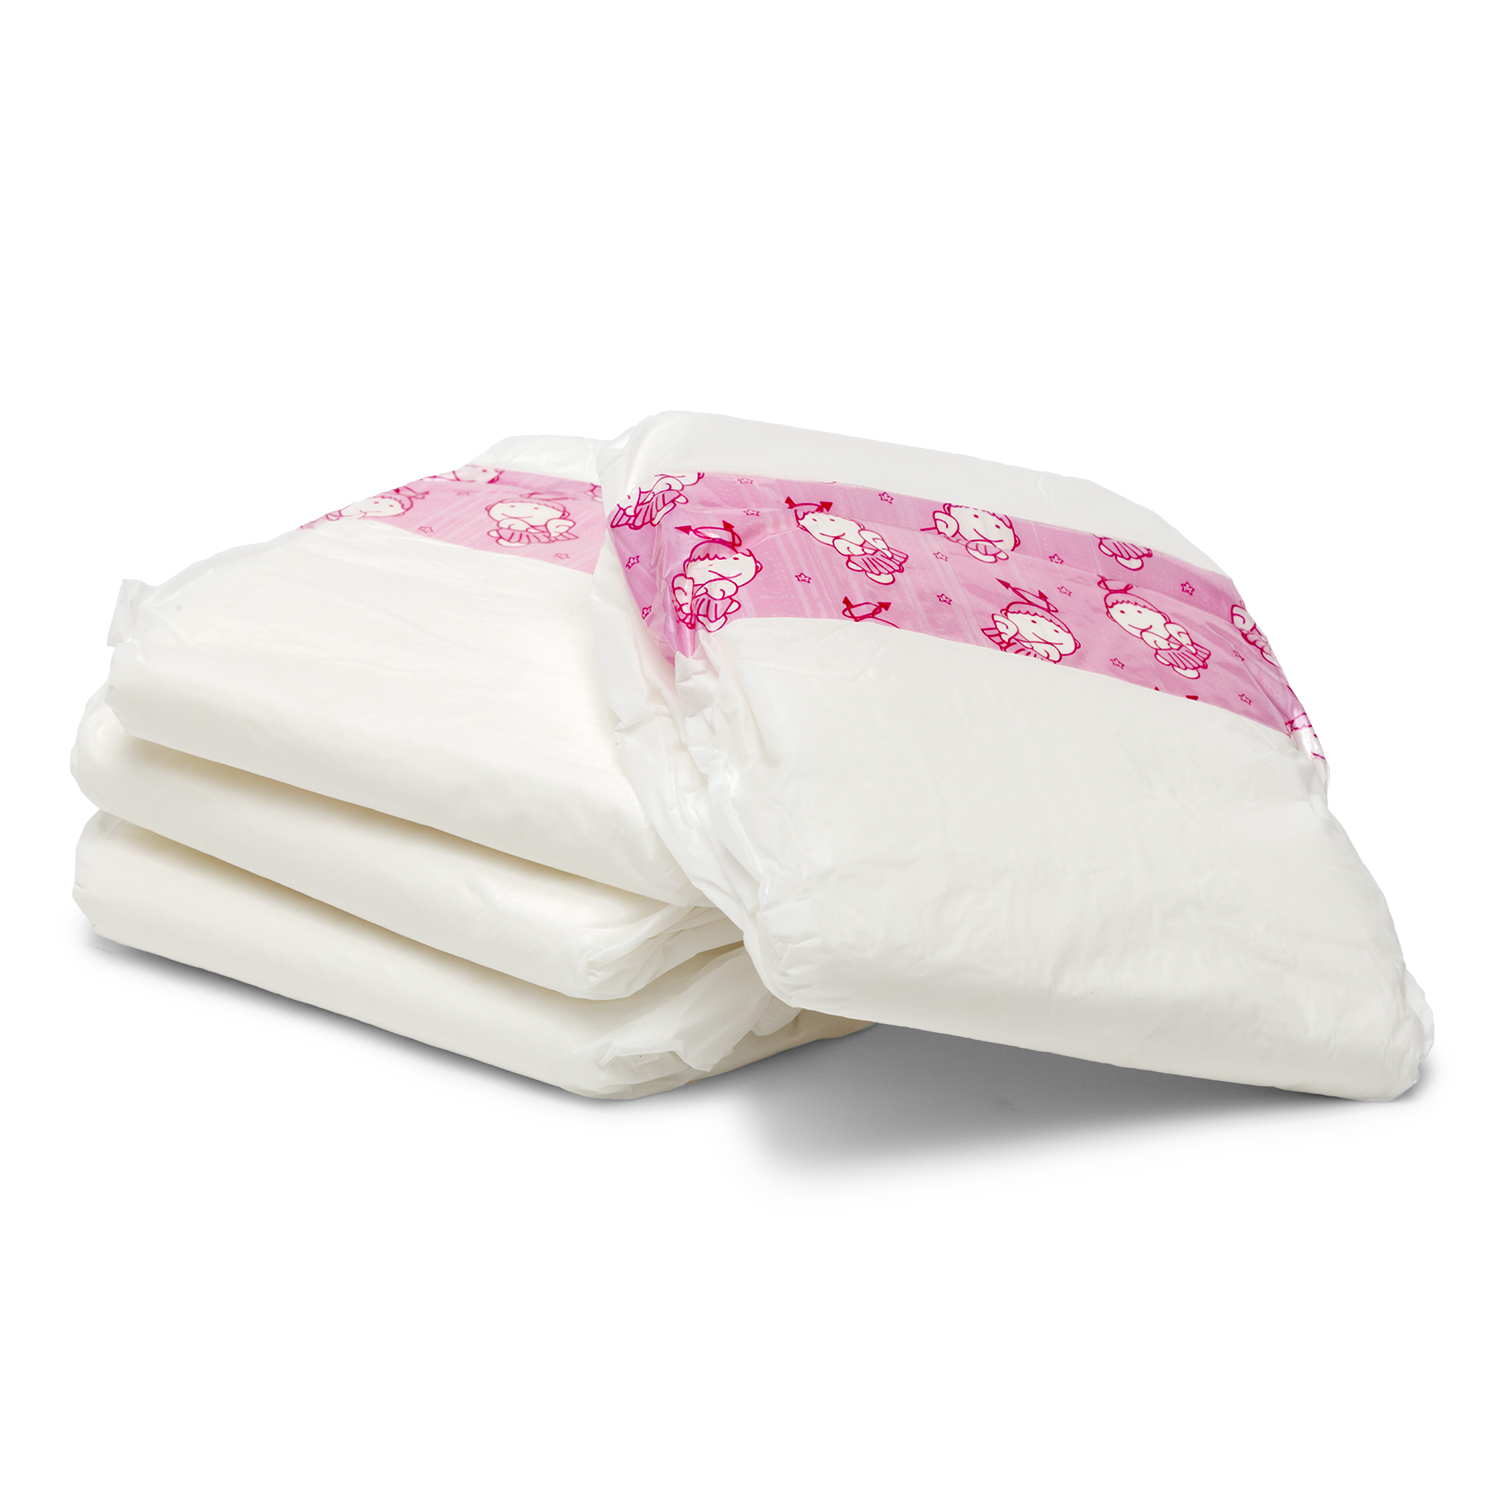 Lundby lundby	doll accessories doll nappies